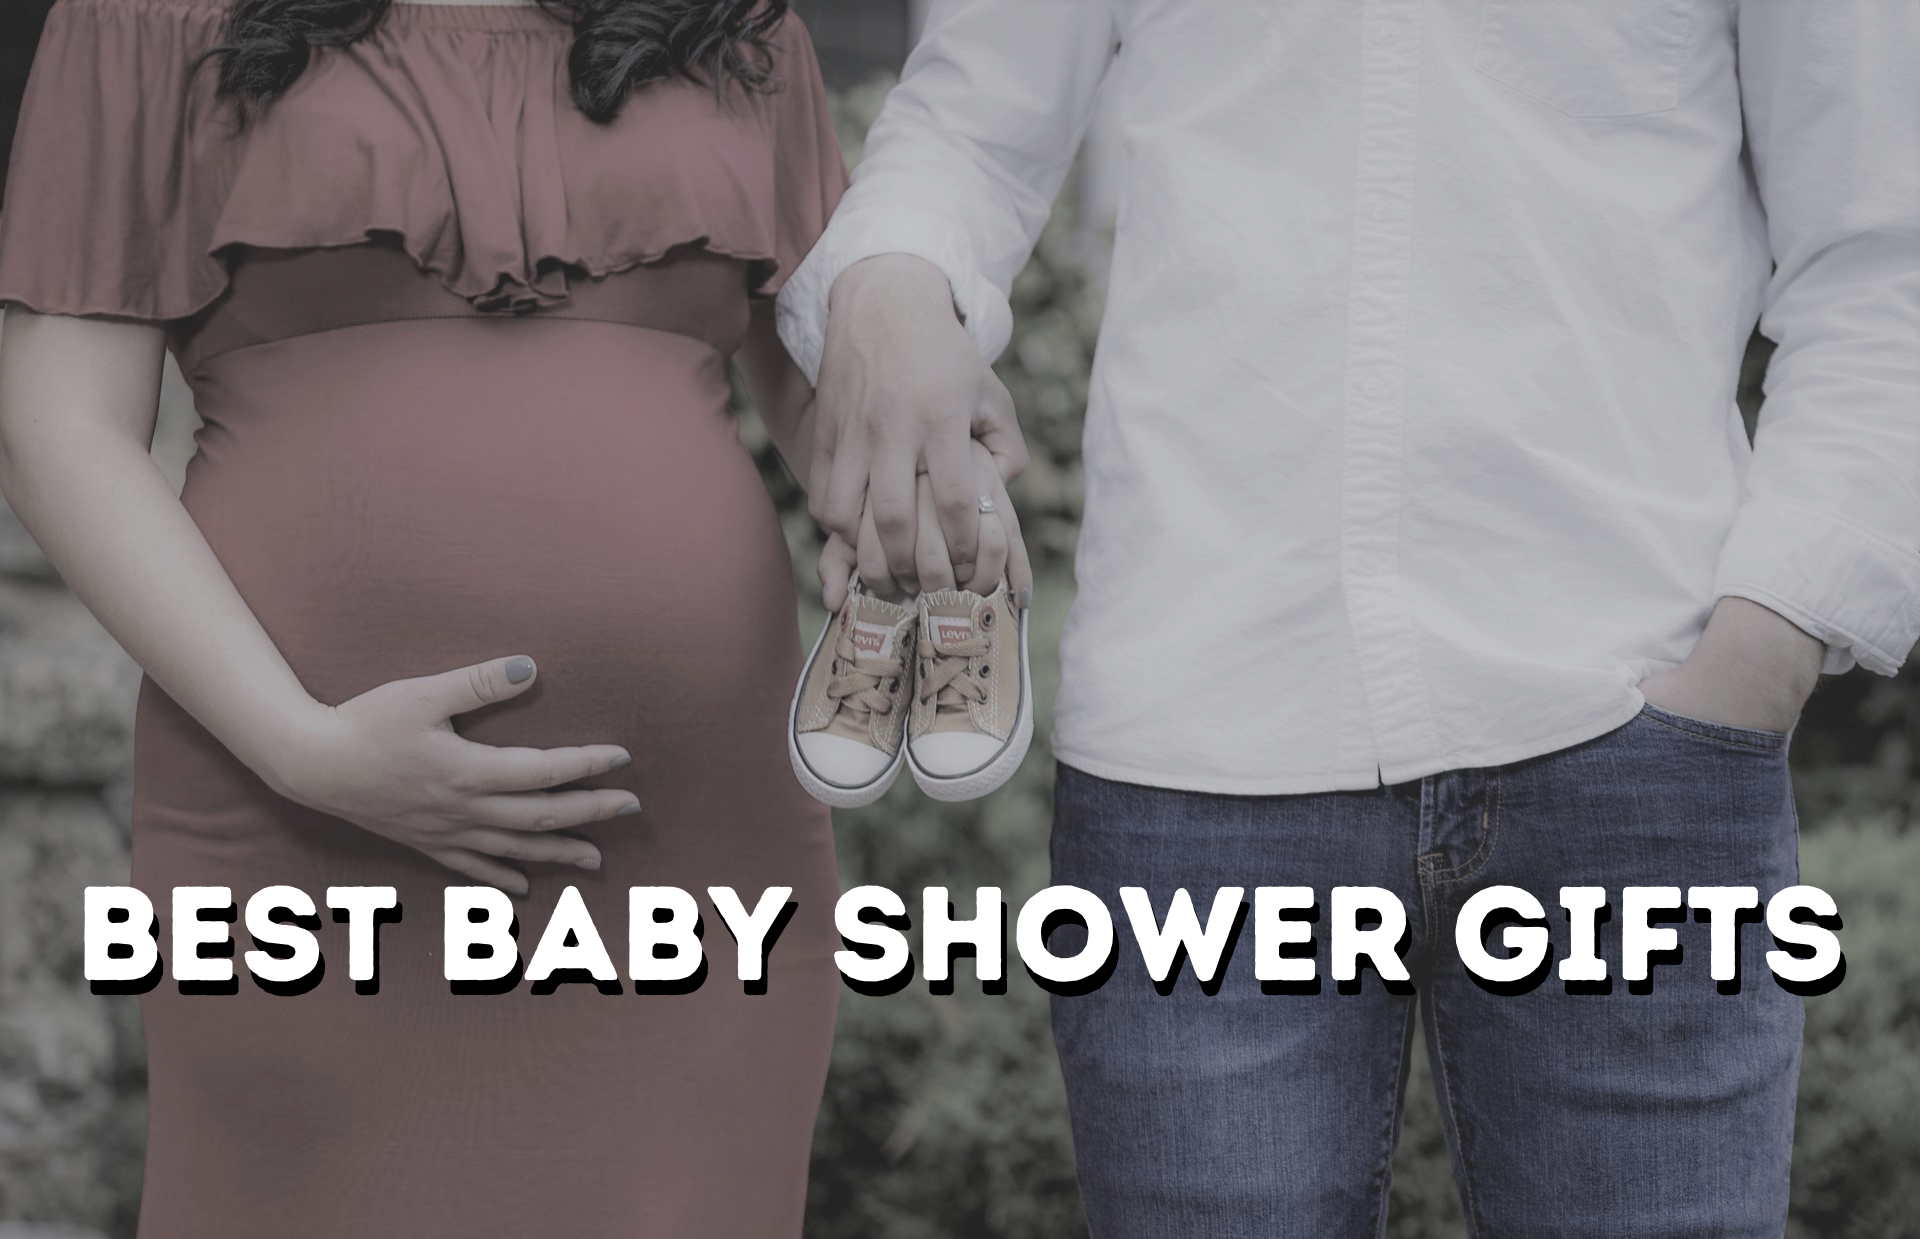 BEST BABY SHOWER GIFTS